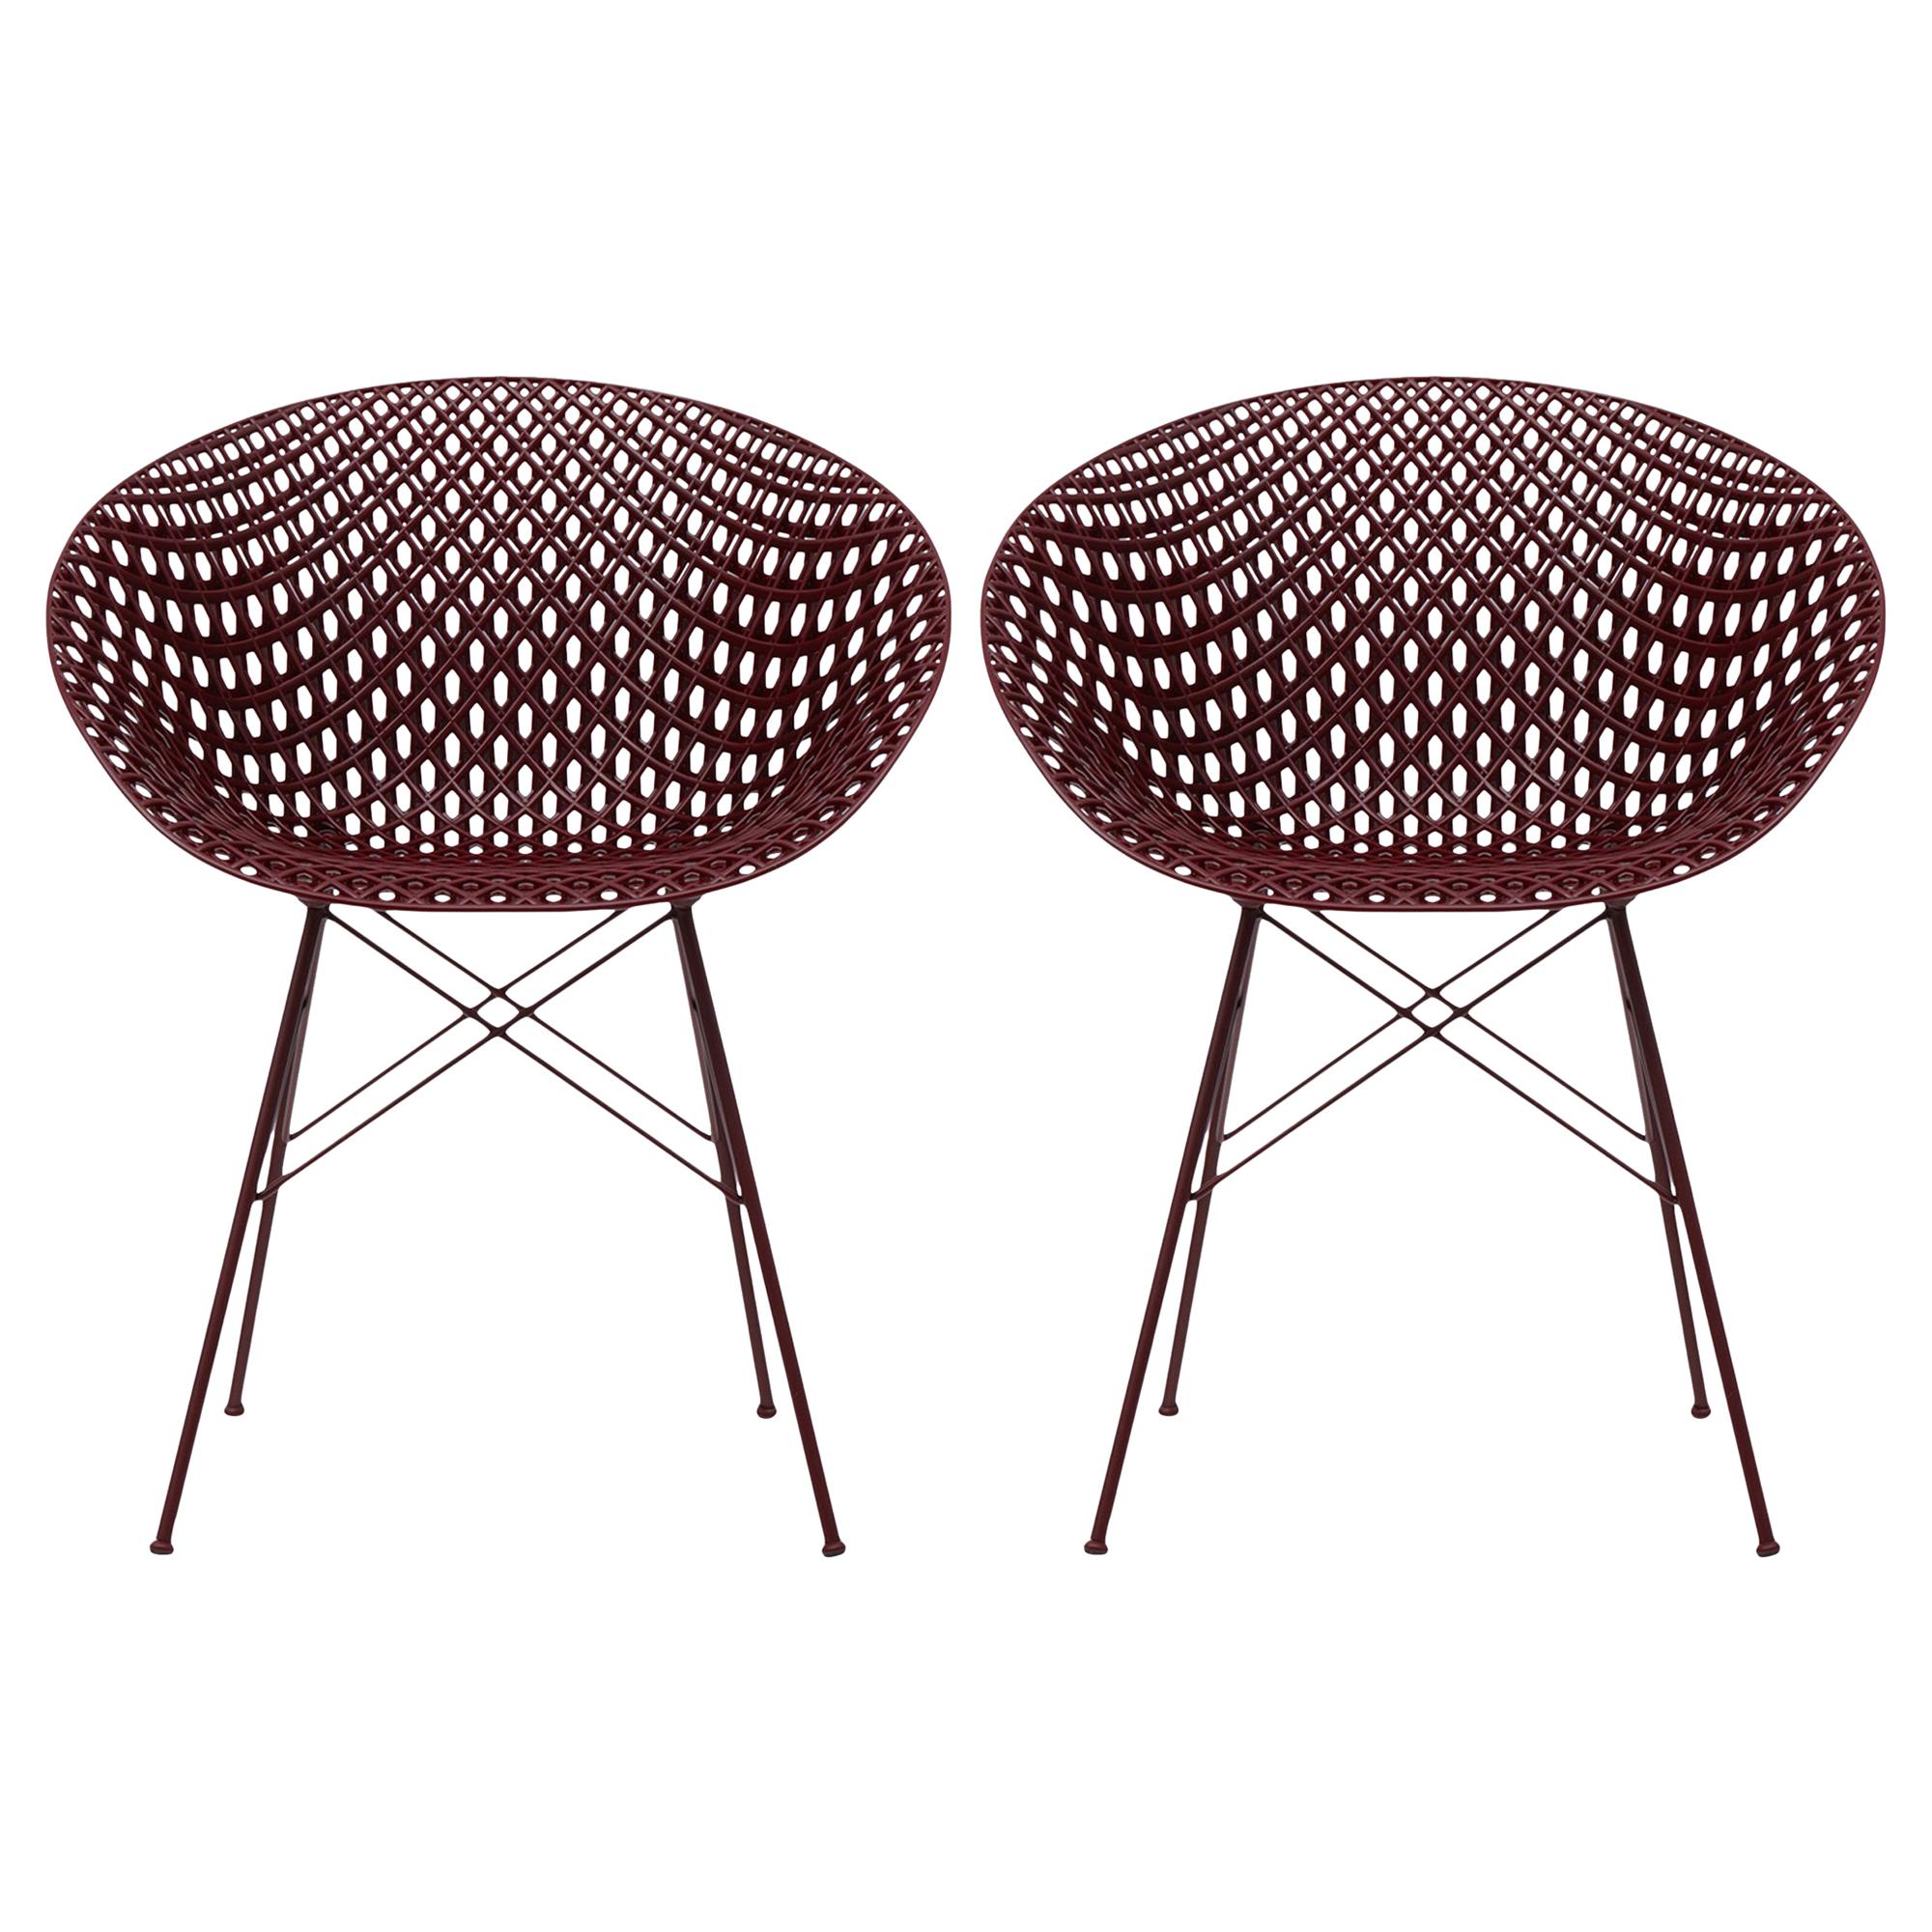 Set of 2 Kartell Smatrik Outdoor Chair in Plum by Tokujin Yoshioka For Sale